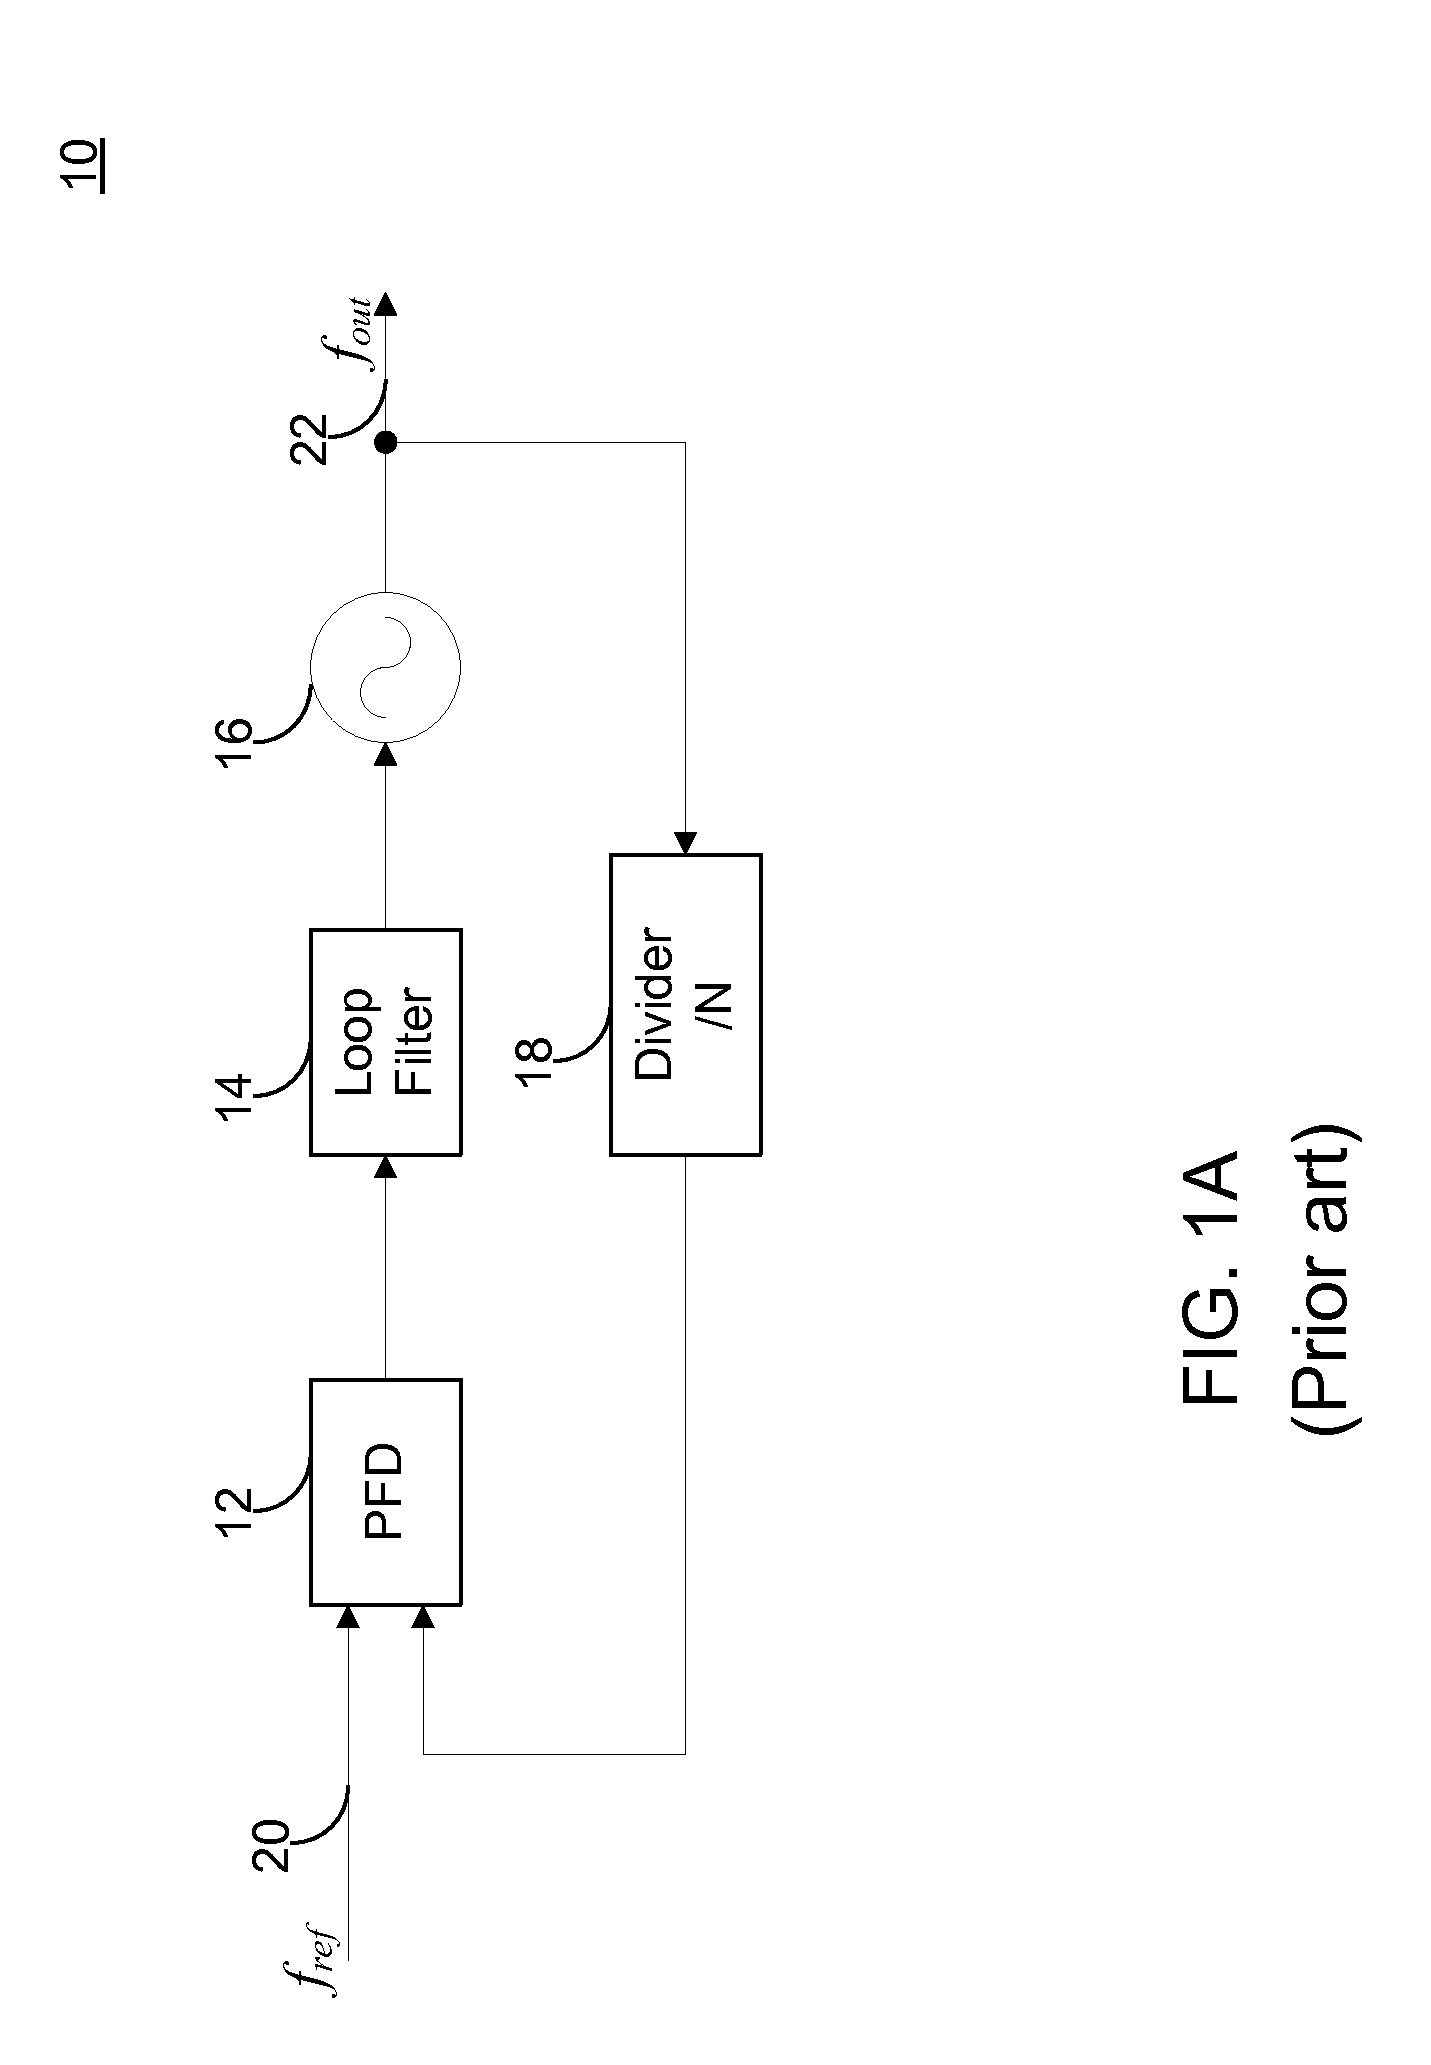 Low noise fractional divider using a multiphase oscillator